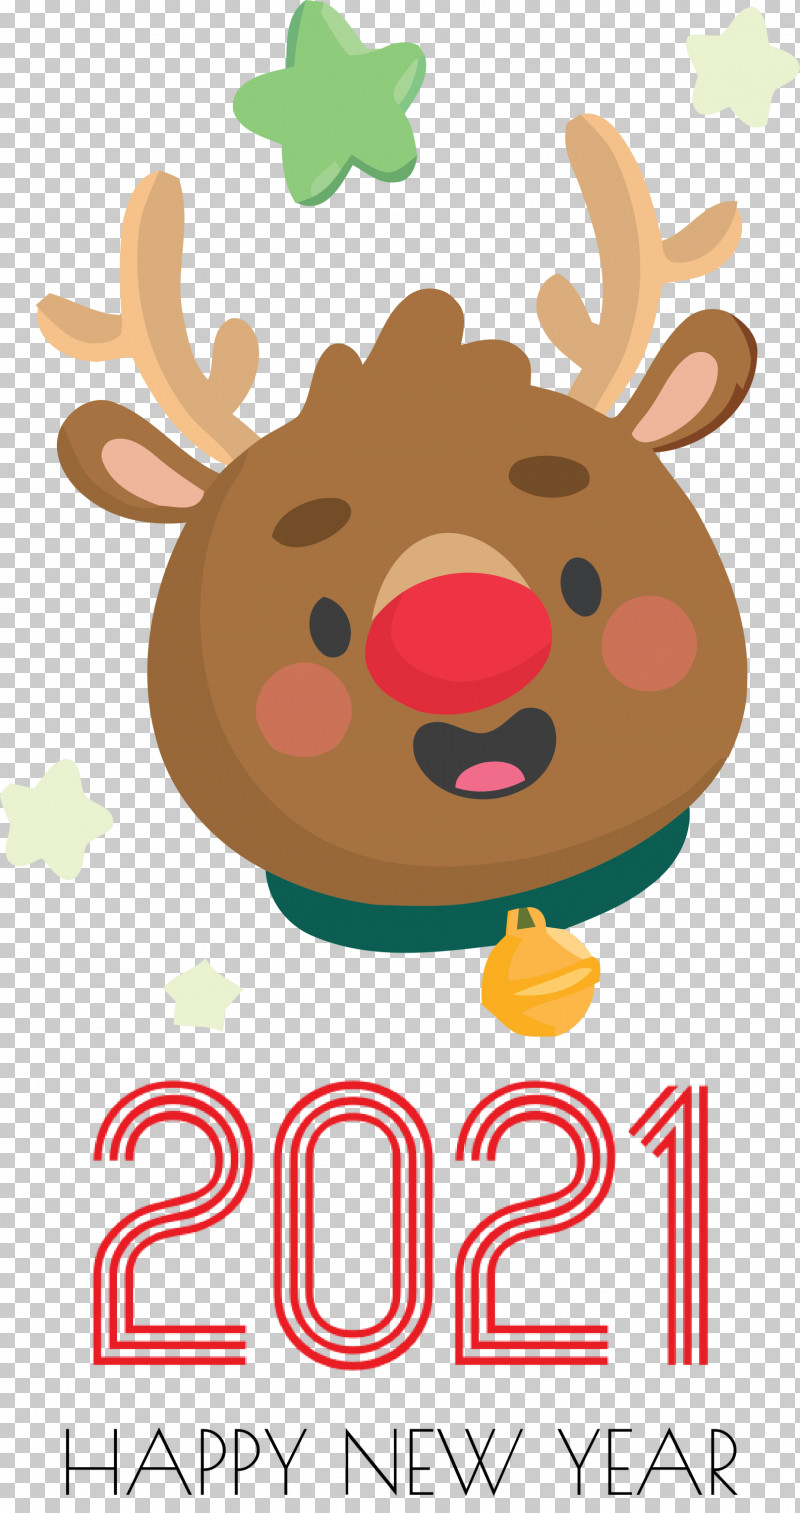 2021 Happy New Year 2021 New Year Happy 2021 New Year PNG, Clipart, 2021 Happy New Year, 2021 New Year, Christmas Day, Editing, Festival Free PNG Download